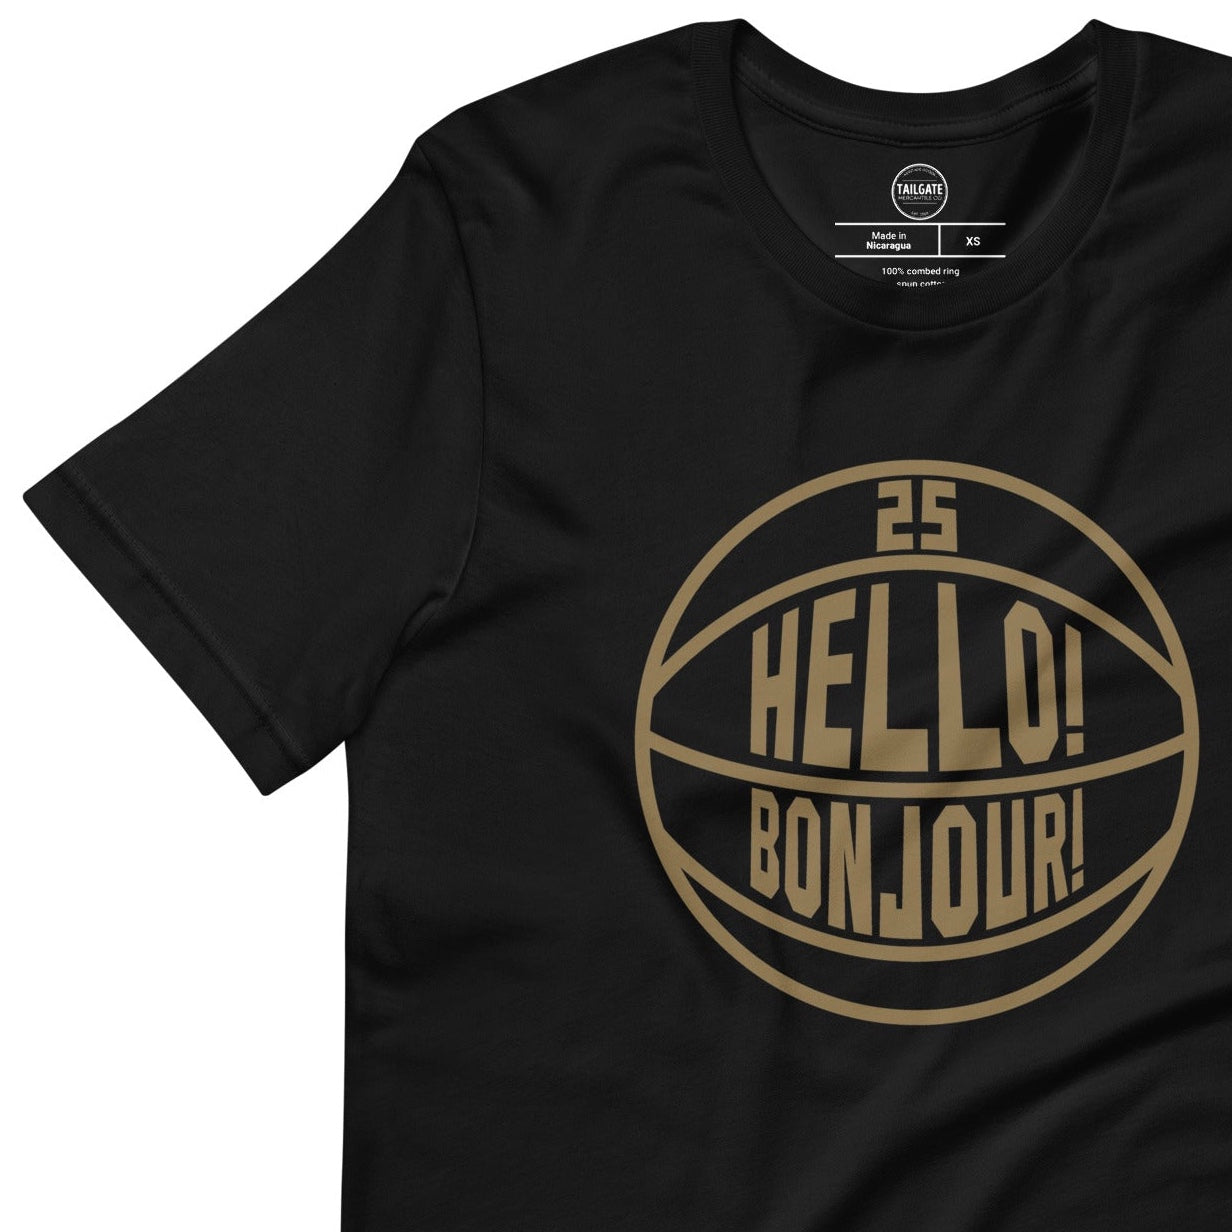 This image details the graphic design "Hello! Bonjour!". In the image, the words are built into a basketball and feature Chris Boucher's number 25. The Toronto Raptors' announcer, Jack Armstrong, loves to shout out Hello! Bonjour! when Chris Boucher does something exciting on the court. The tee is black and the design is in a gold similar to the Toronto Raptors City Edition colours. This item is exclusive to tailgate mercantile and is available only online.